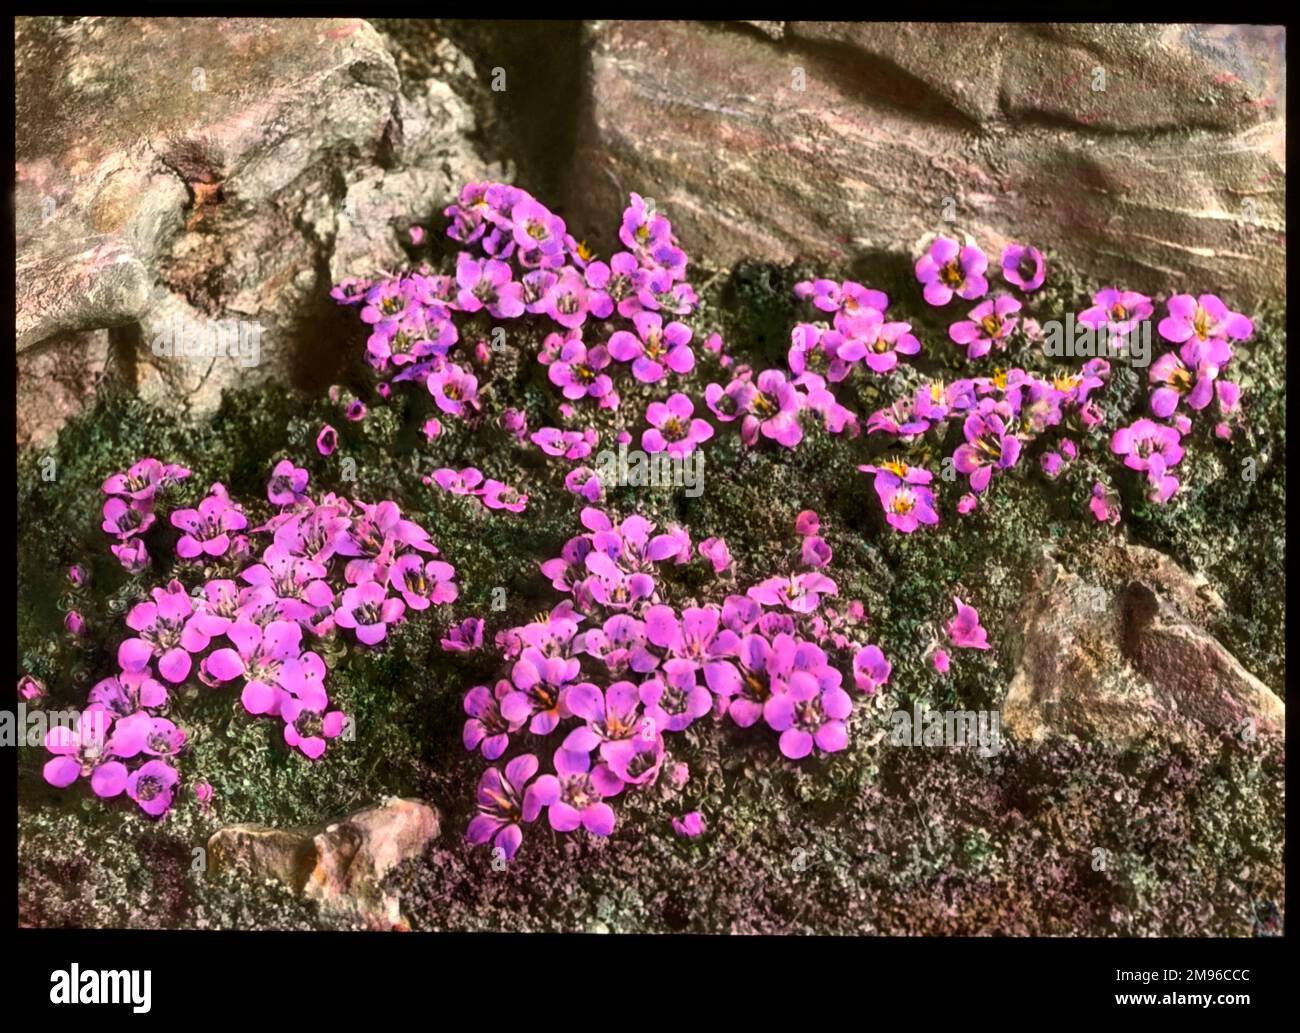 Saxifraga Oppositifolia, a flowering plant of the Saxifragaceae family (commonly known as saxifrages or stone breakers because of their ability to grow in the cracks between rocks). Seen here growing in a rocky setting.  It has purple flowers. Stock Photo